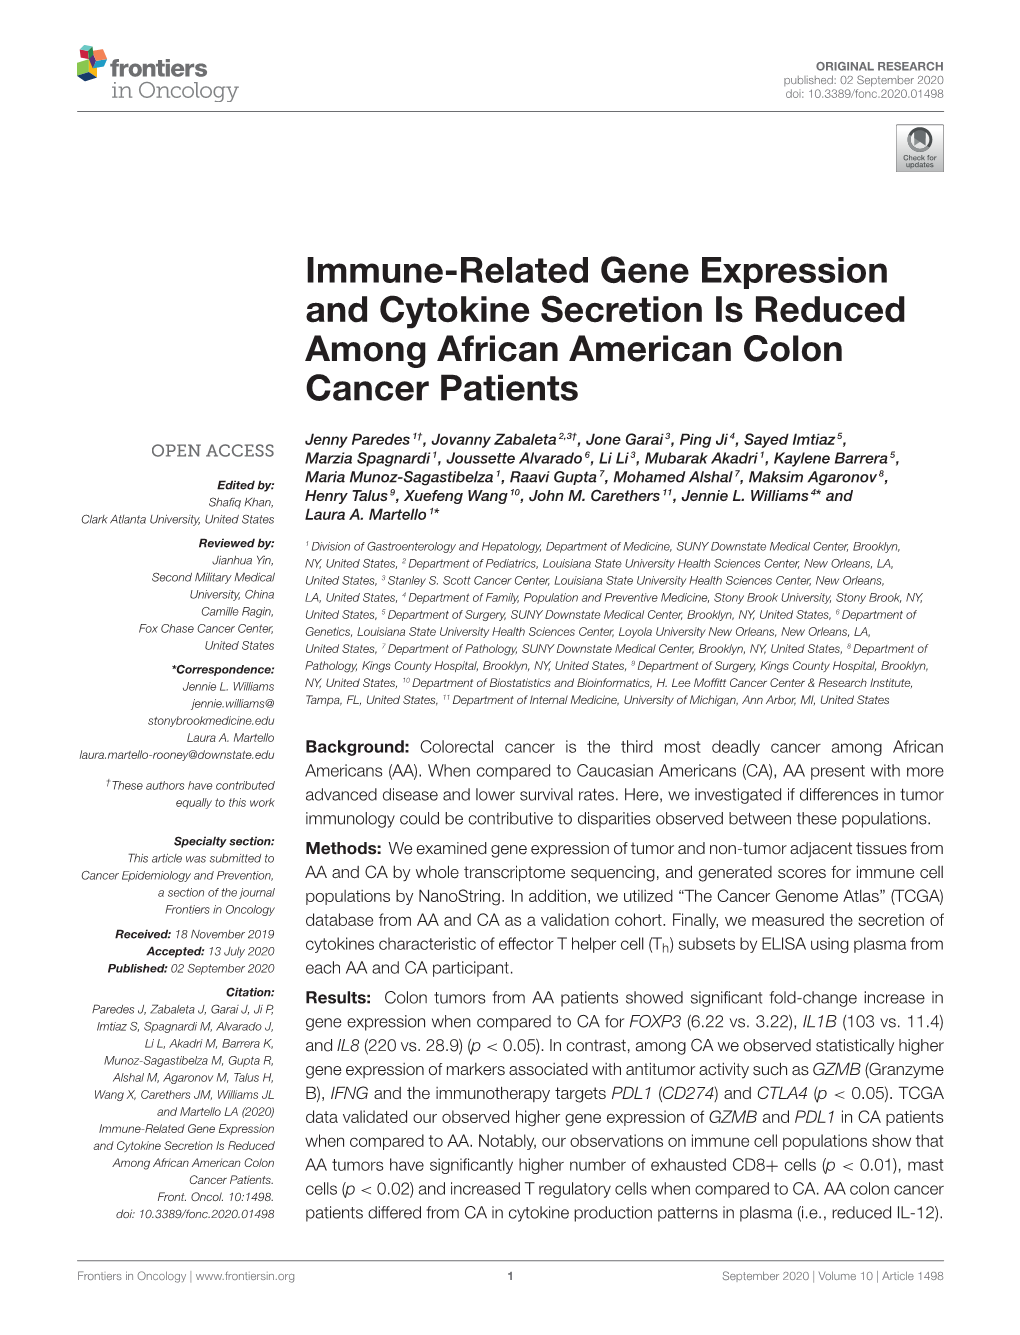 Immune-Related Gene Expression and Cytokine Secretion Is Reduced Among African American Colon Cancer Patients